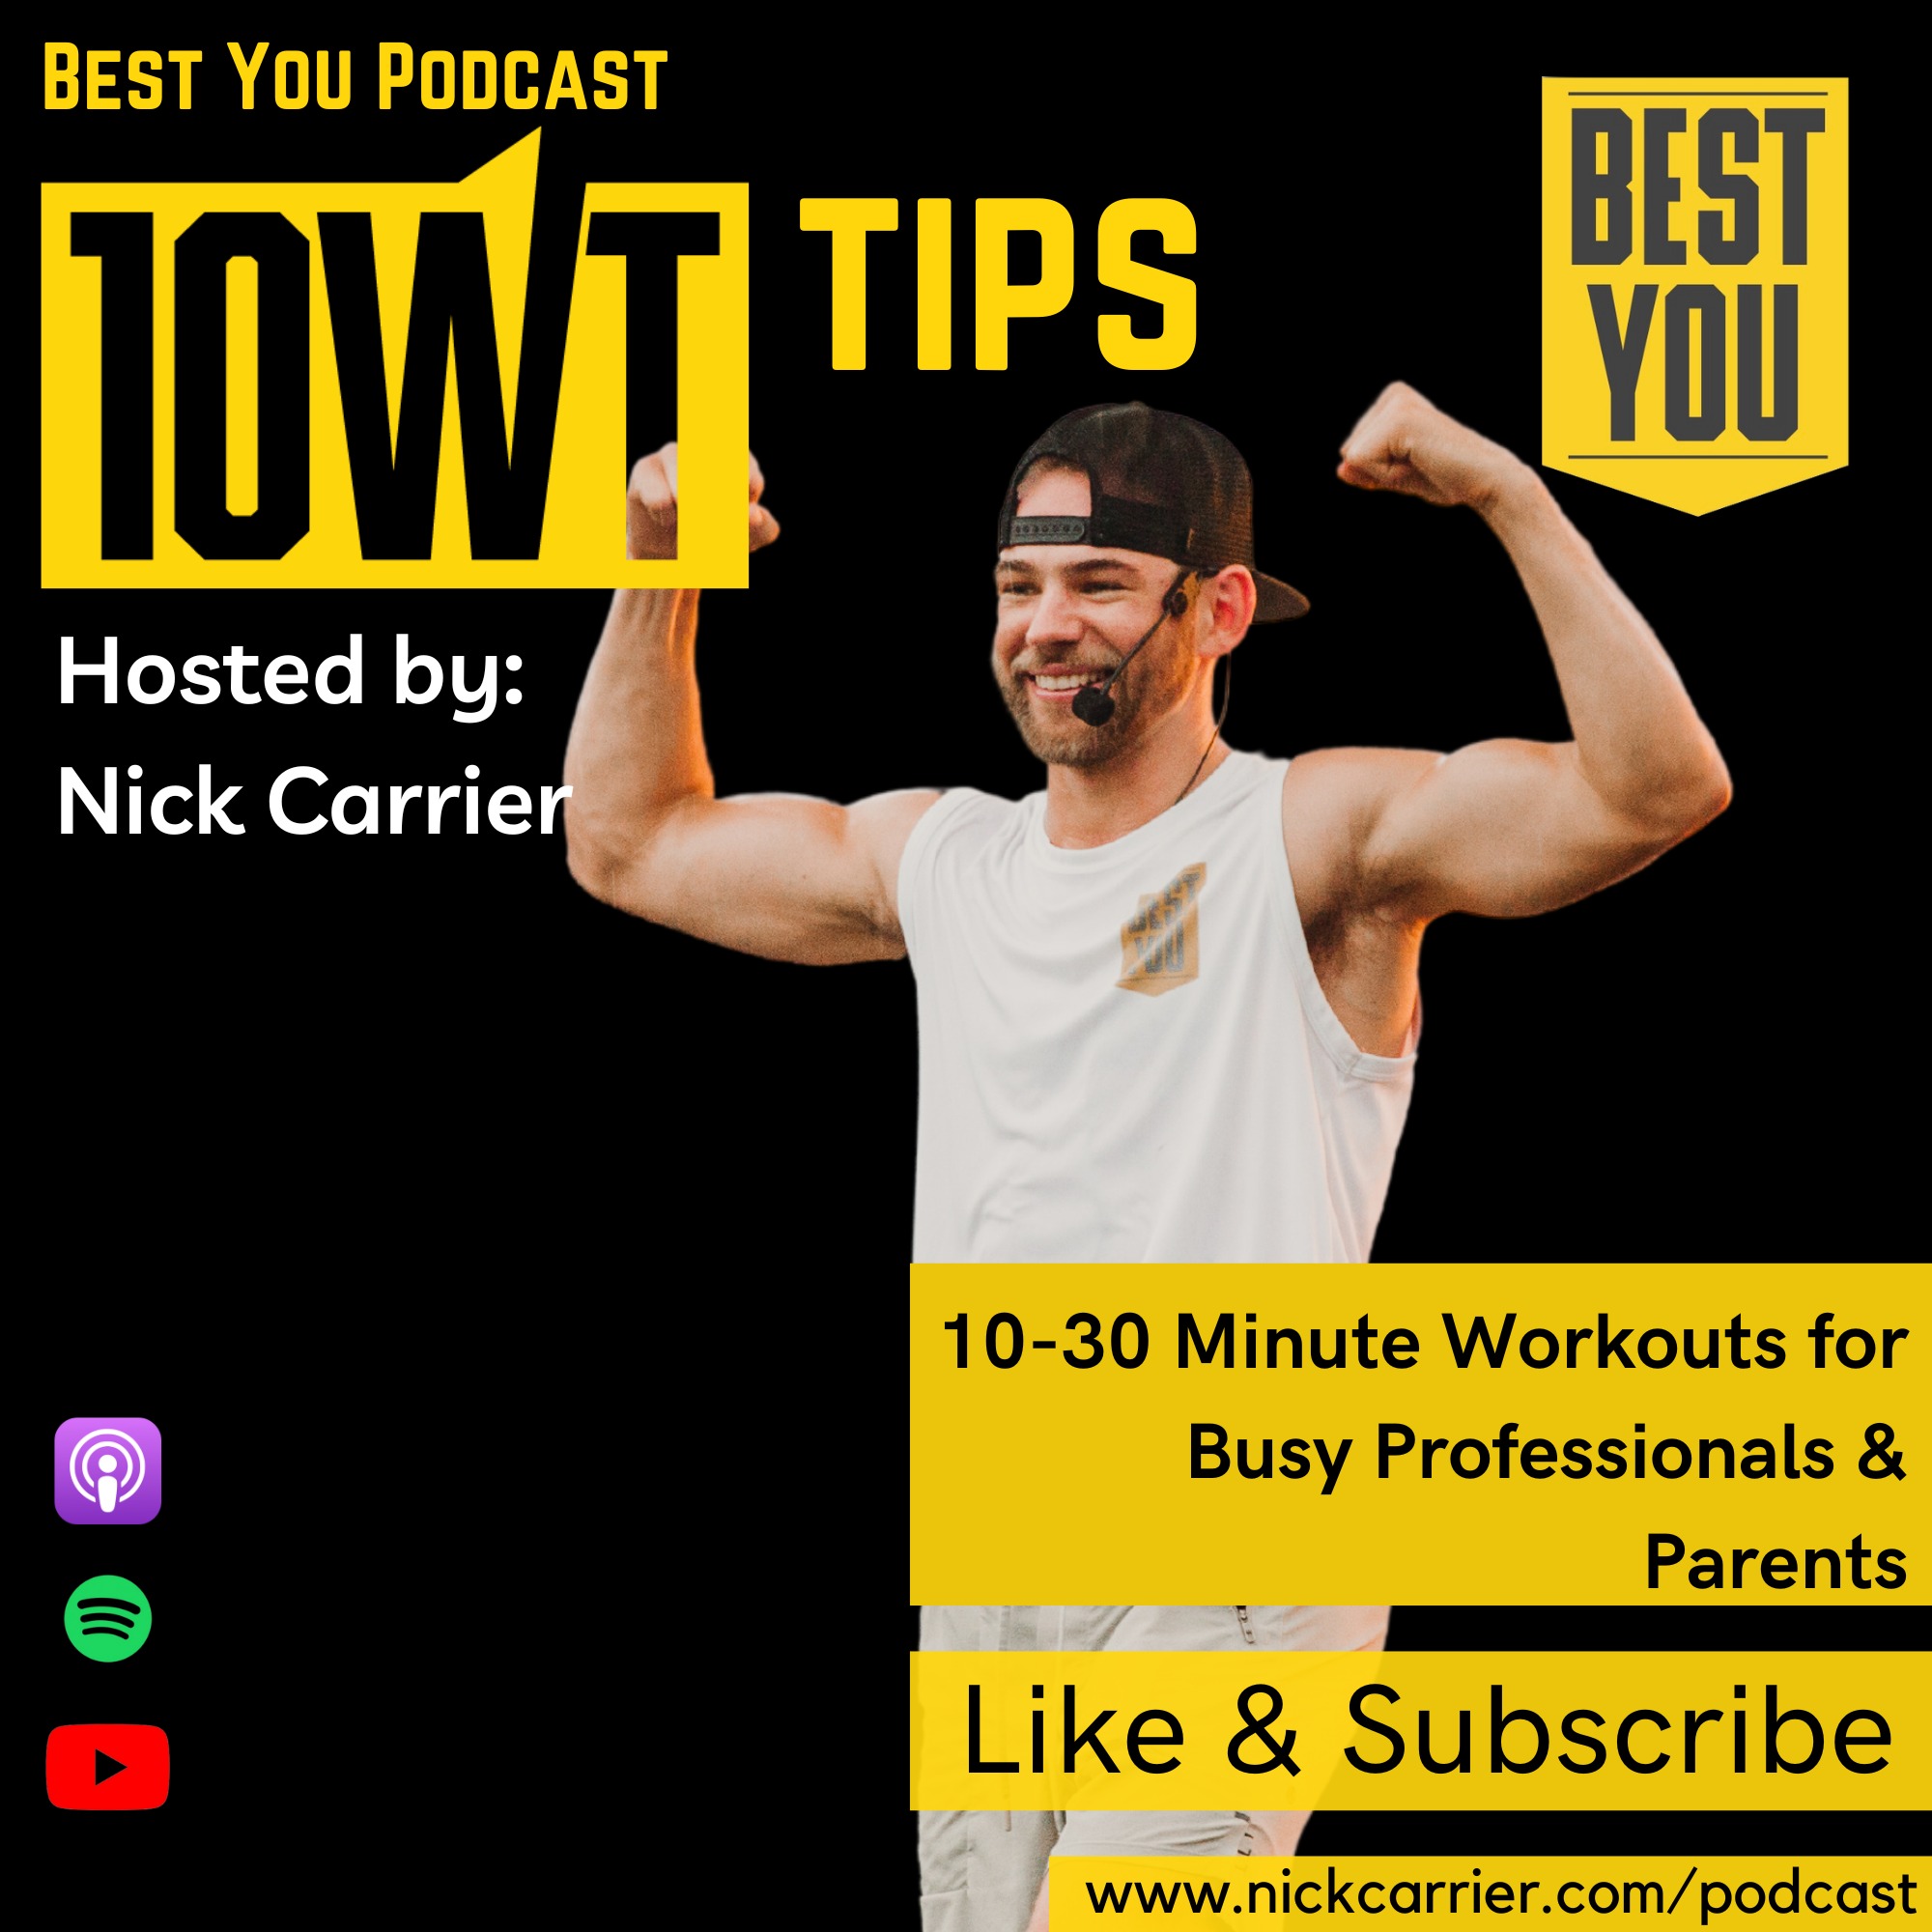 10-30 Minute Workouts for Busy Professionals & Parents